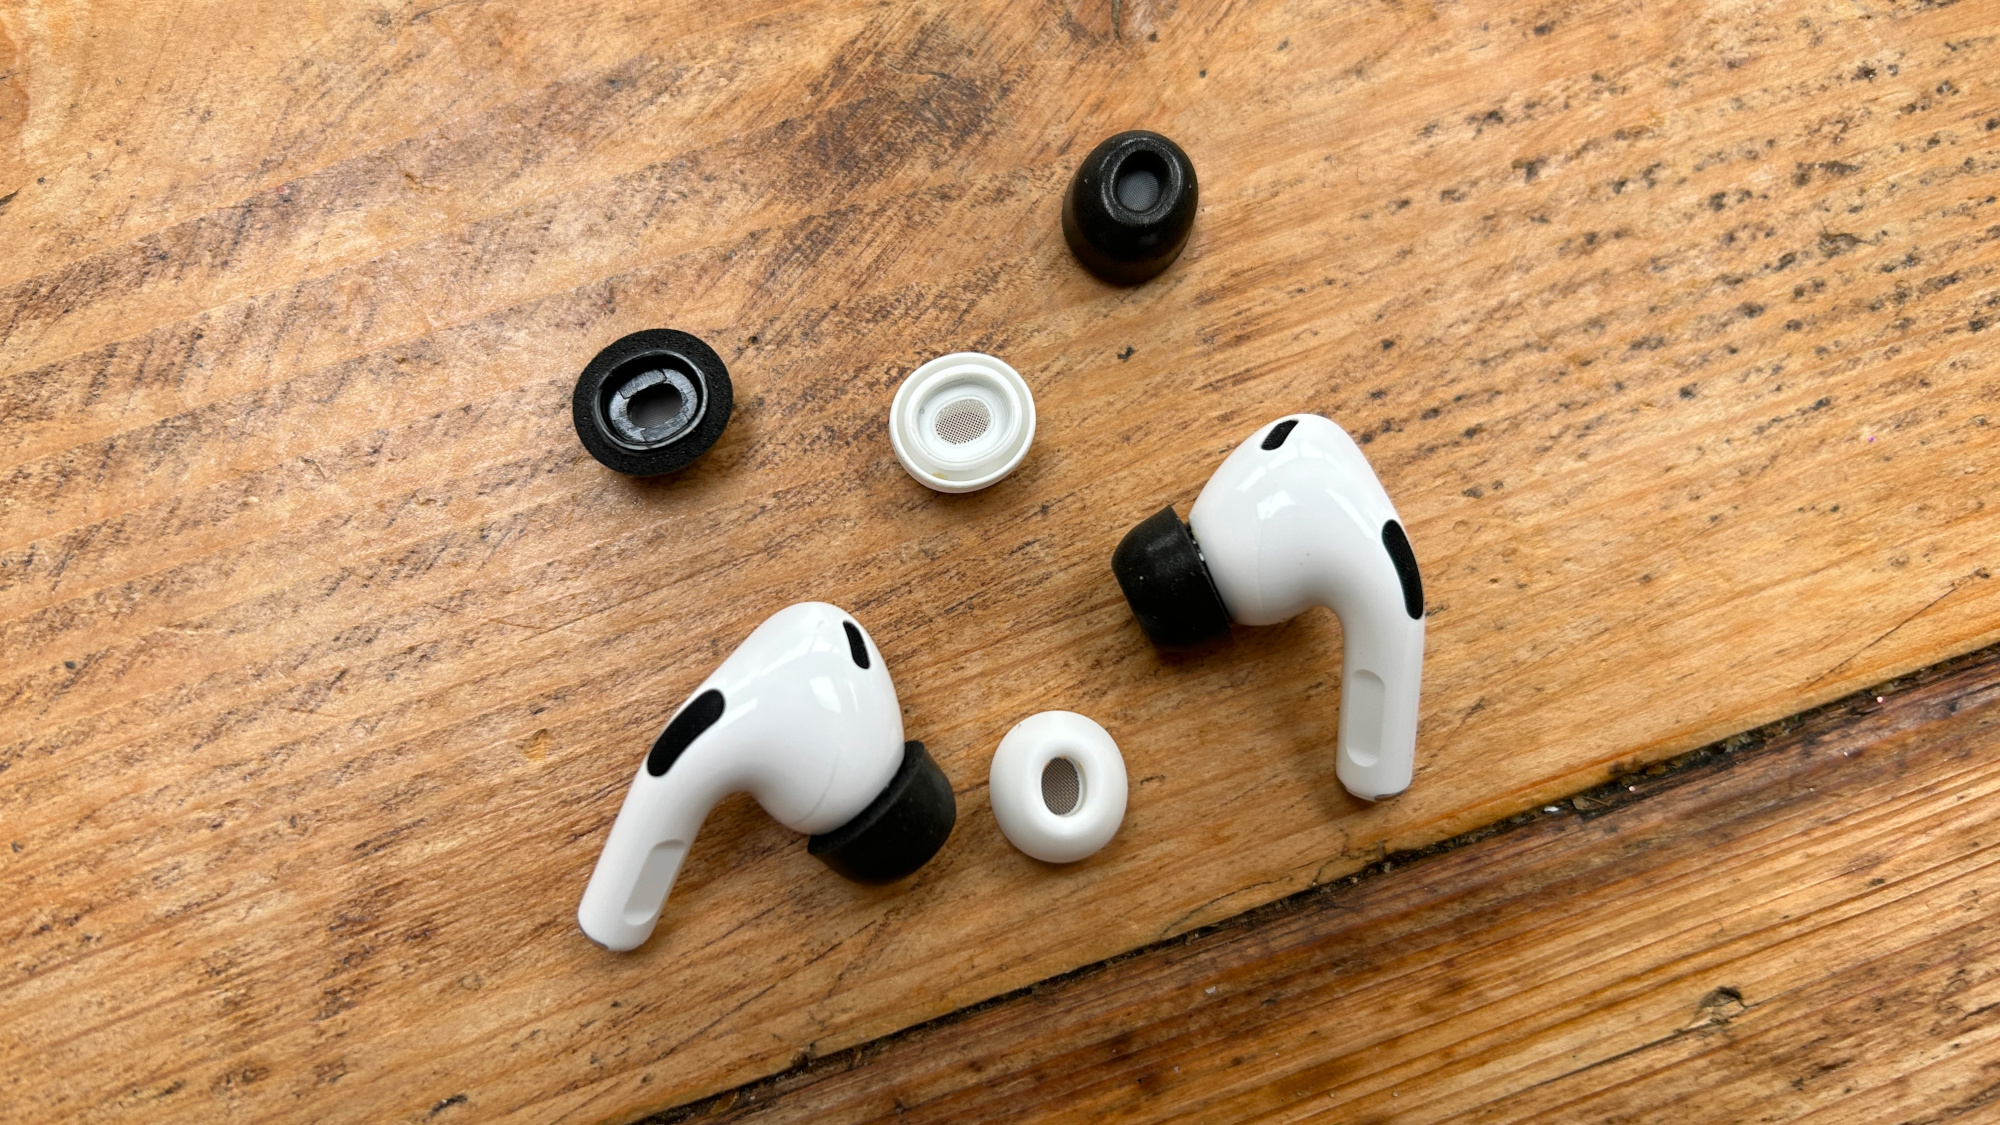 Comply Foam Tips - Ear Tips for AirPods Pro Generation 1 & 2 M